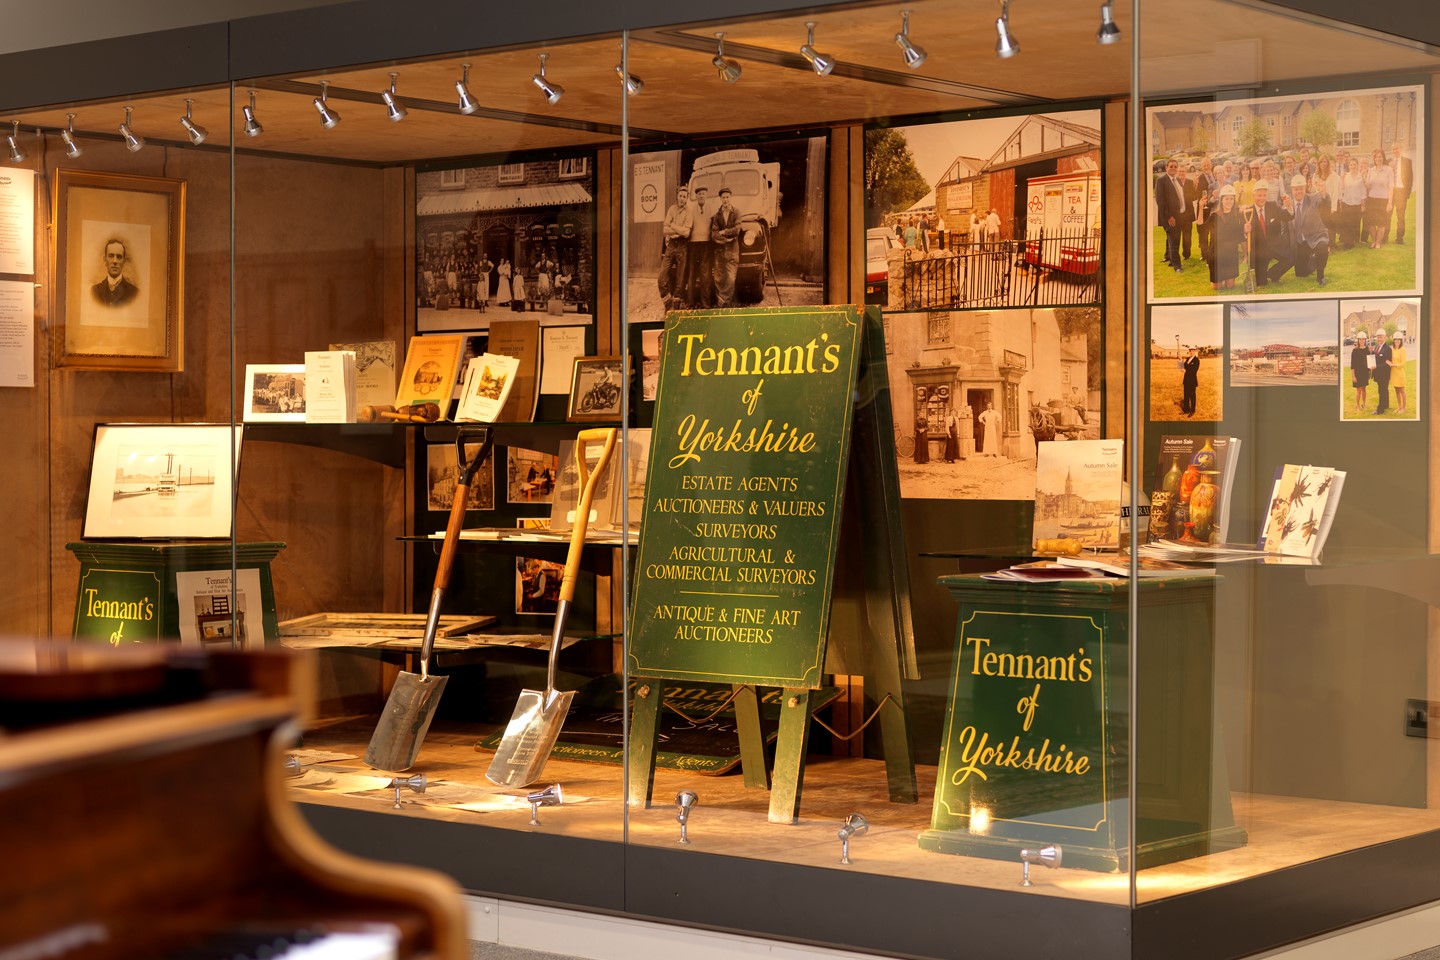 Display cabint on the history of Tennants